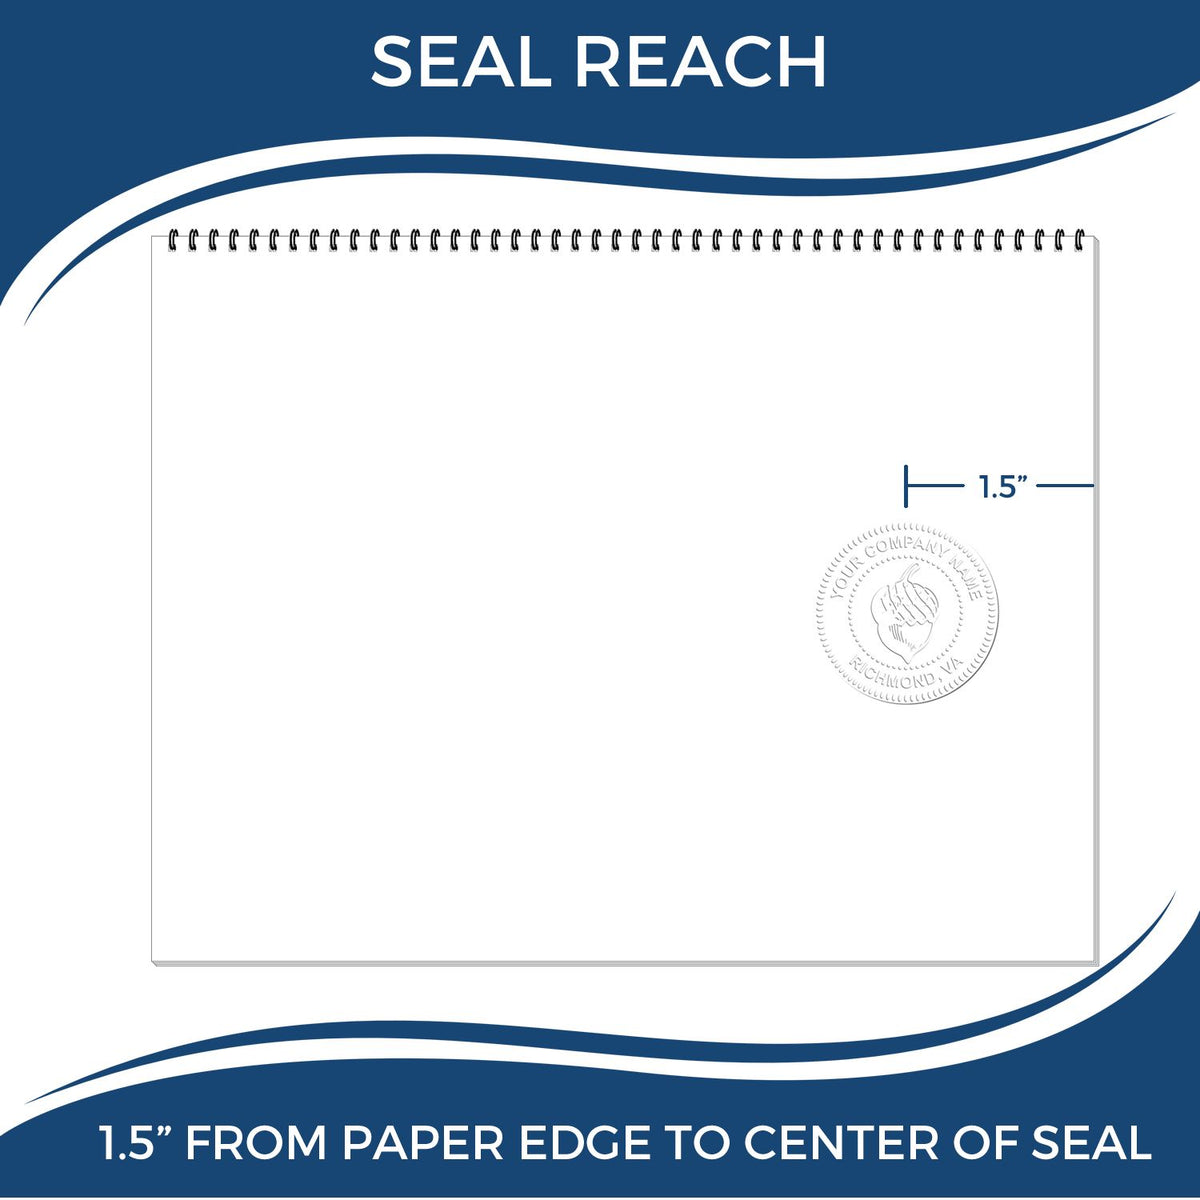 An infographic showing the seal reach which is represented by a ruler and a miniature seal image of the State of Washington Architectural Seal Embosser